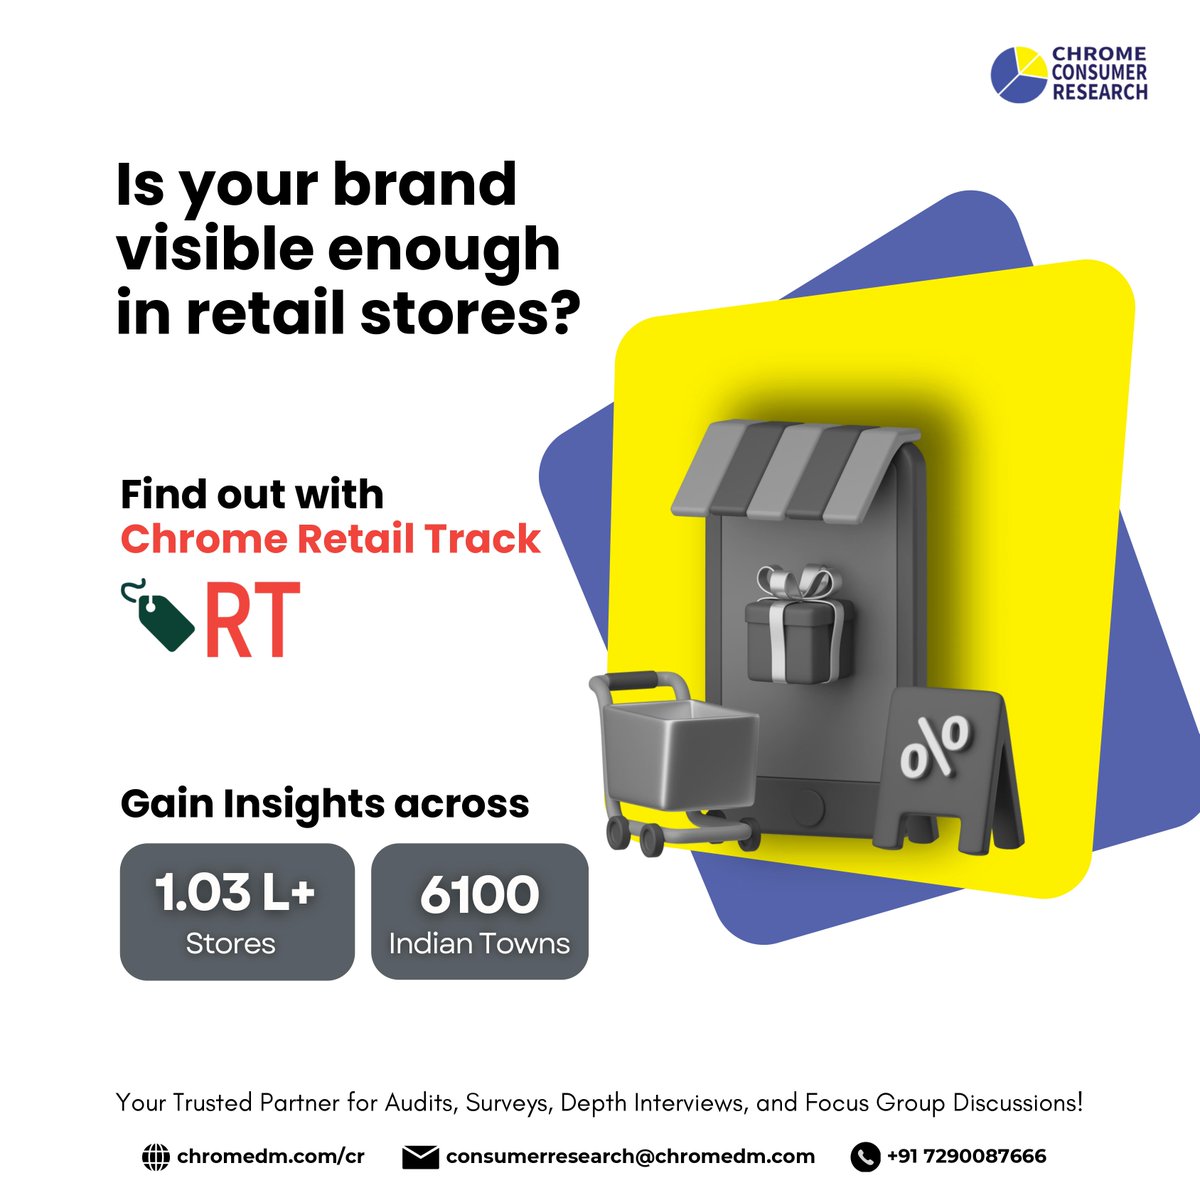 See if your brand is standing out or not with Chrome Retail Track.

📌 For more info, let’s connect - forms.gle/iYtswjmSBb28mJ…
_
#ChromeConsumerResearch , #research , #ChromeRetailTrack , #Retail , #retailindustry , #ChromeDM , #branding , #BRAND